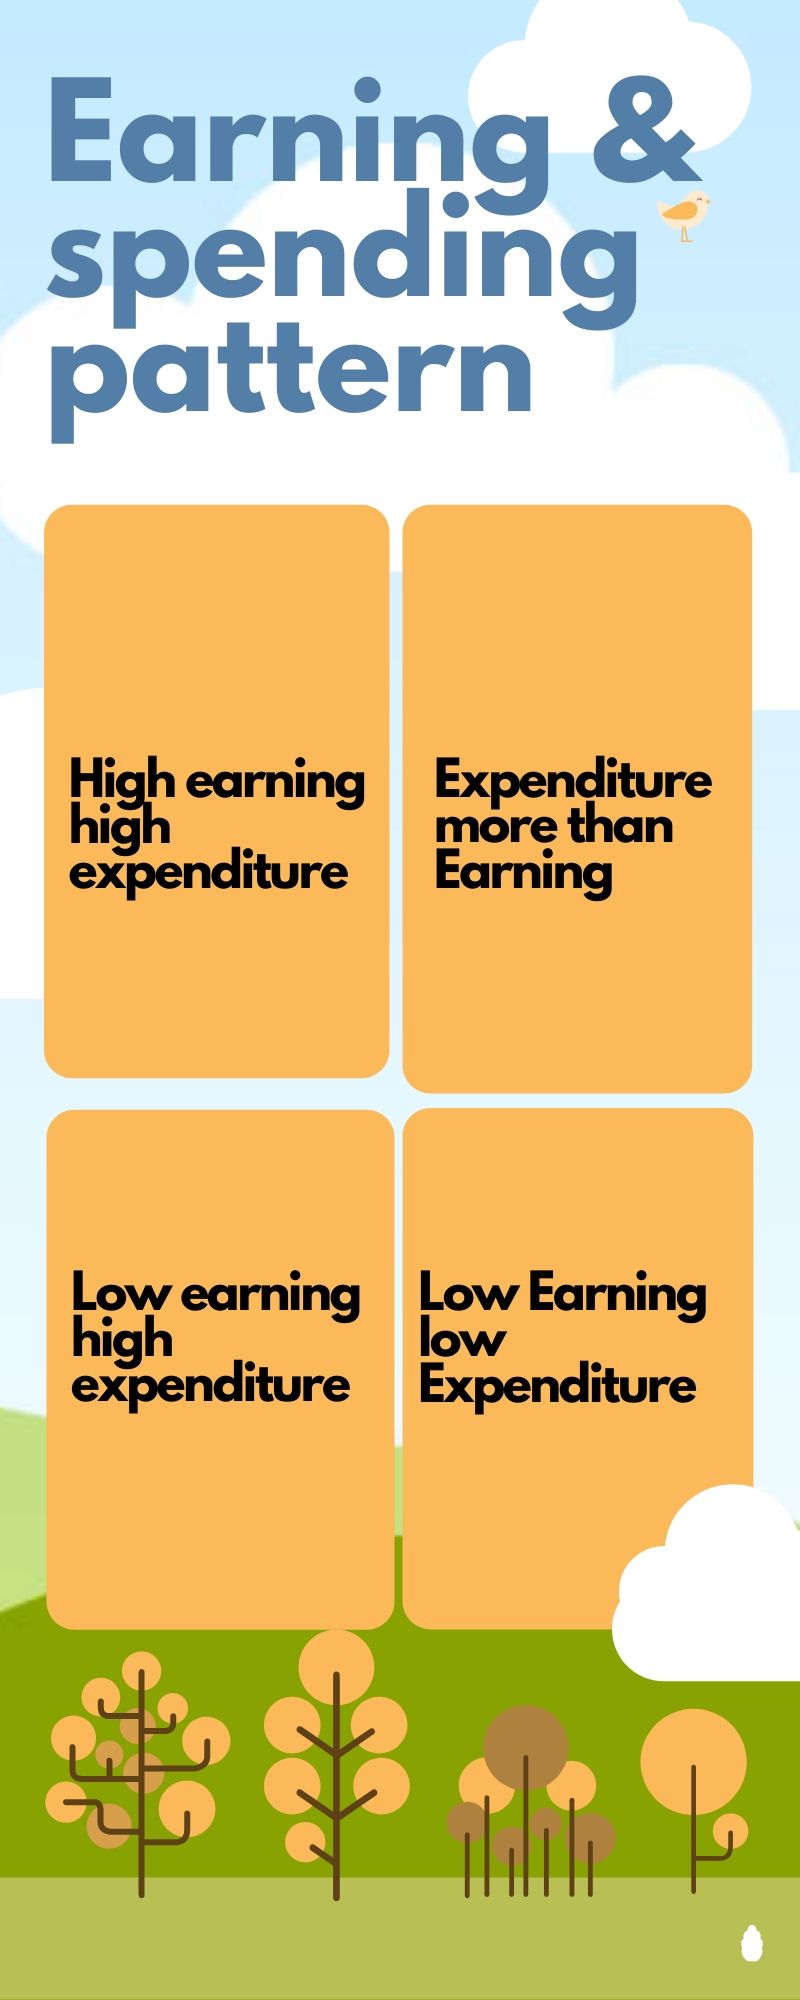 Earning and spending pattern